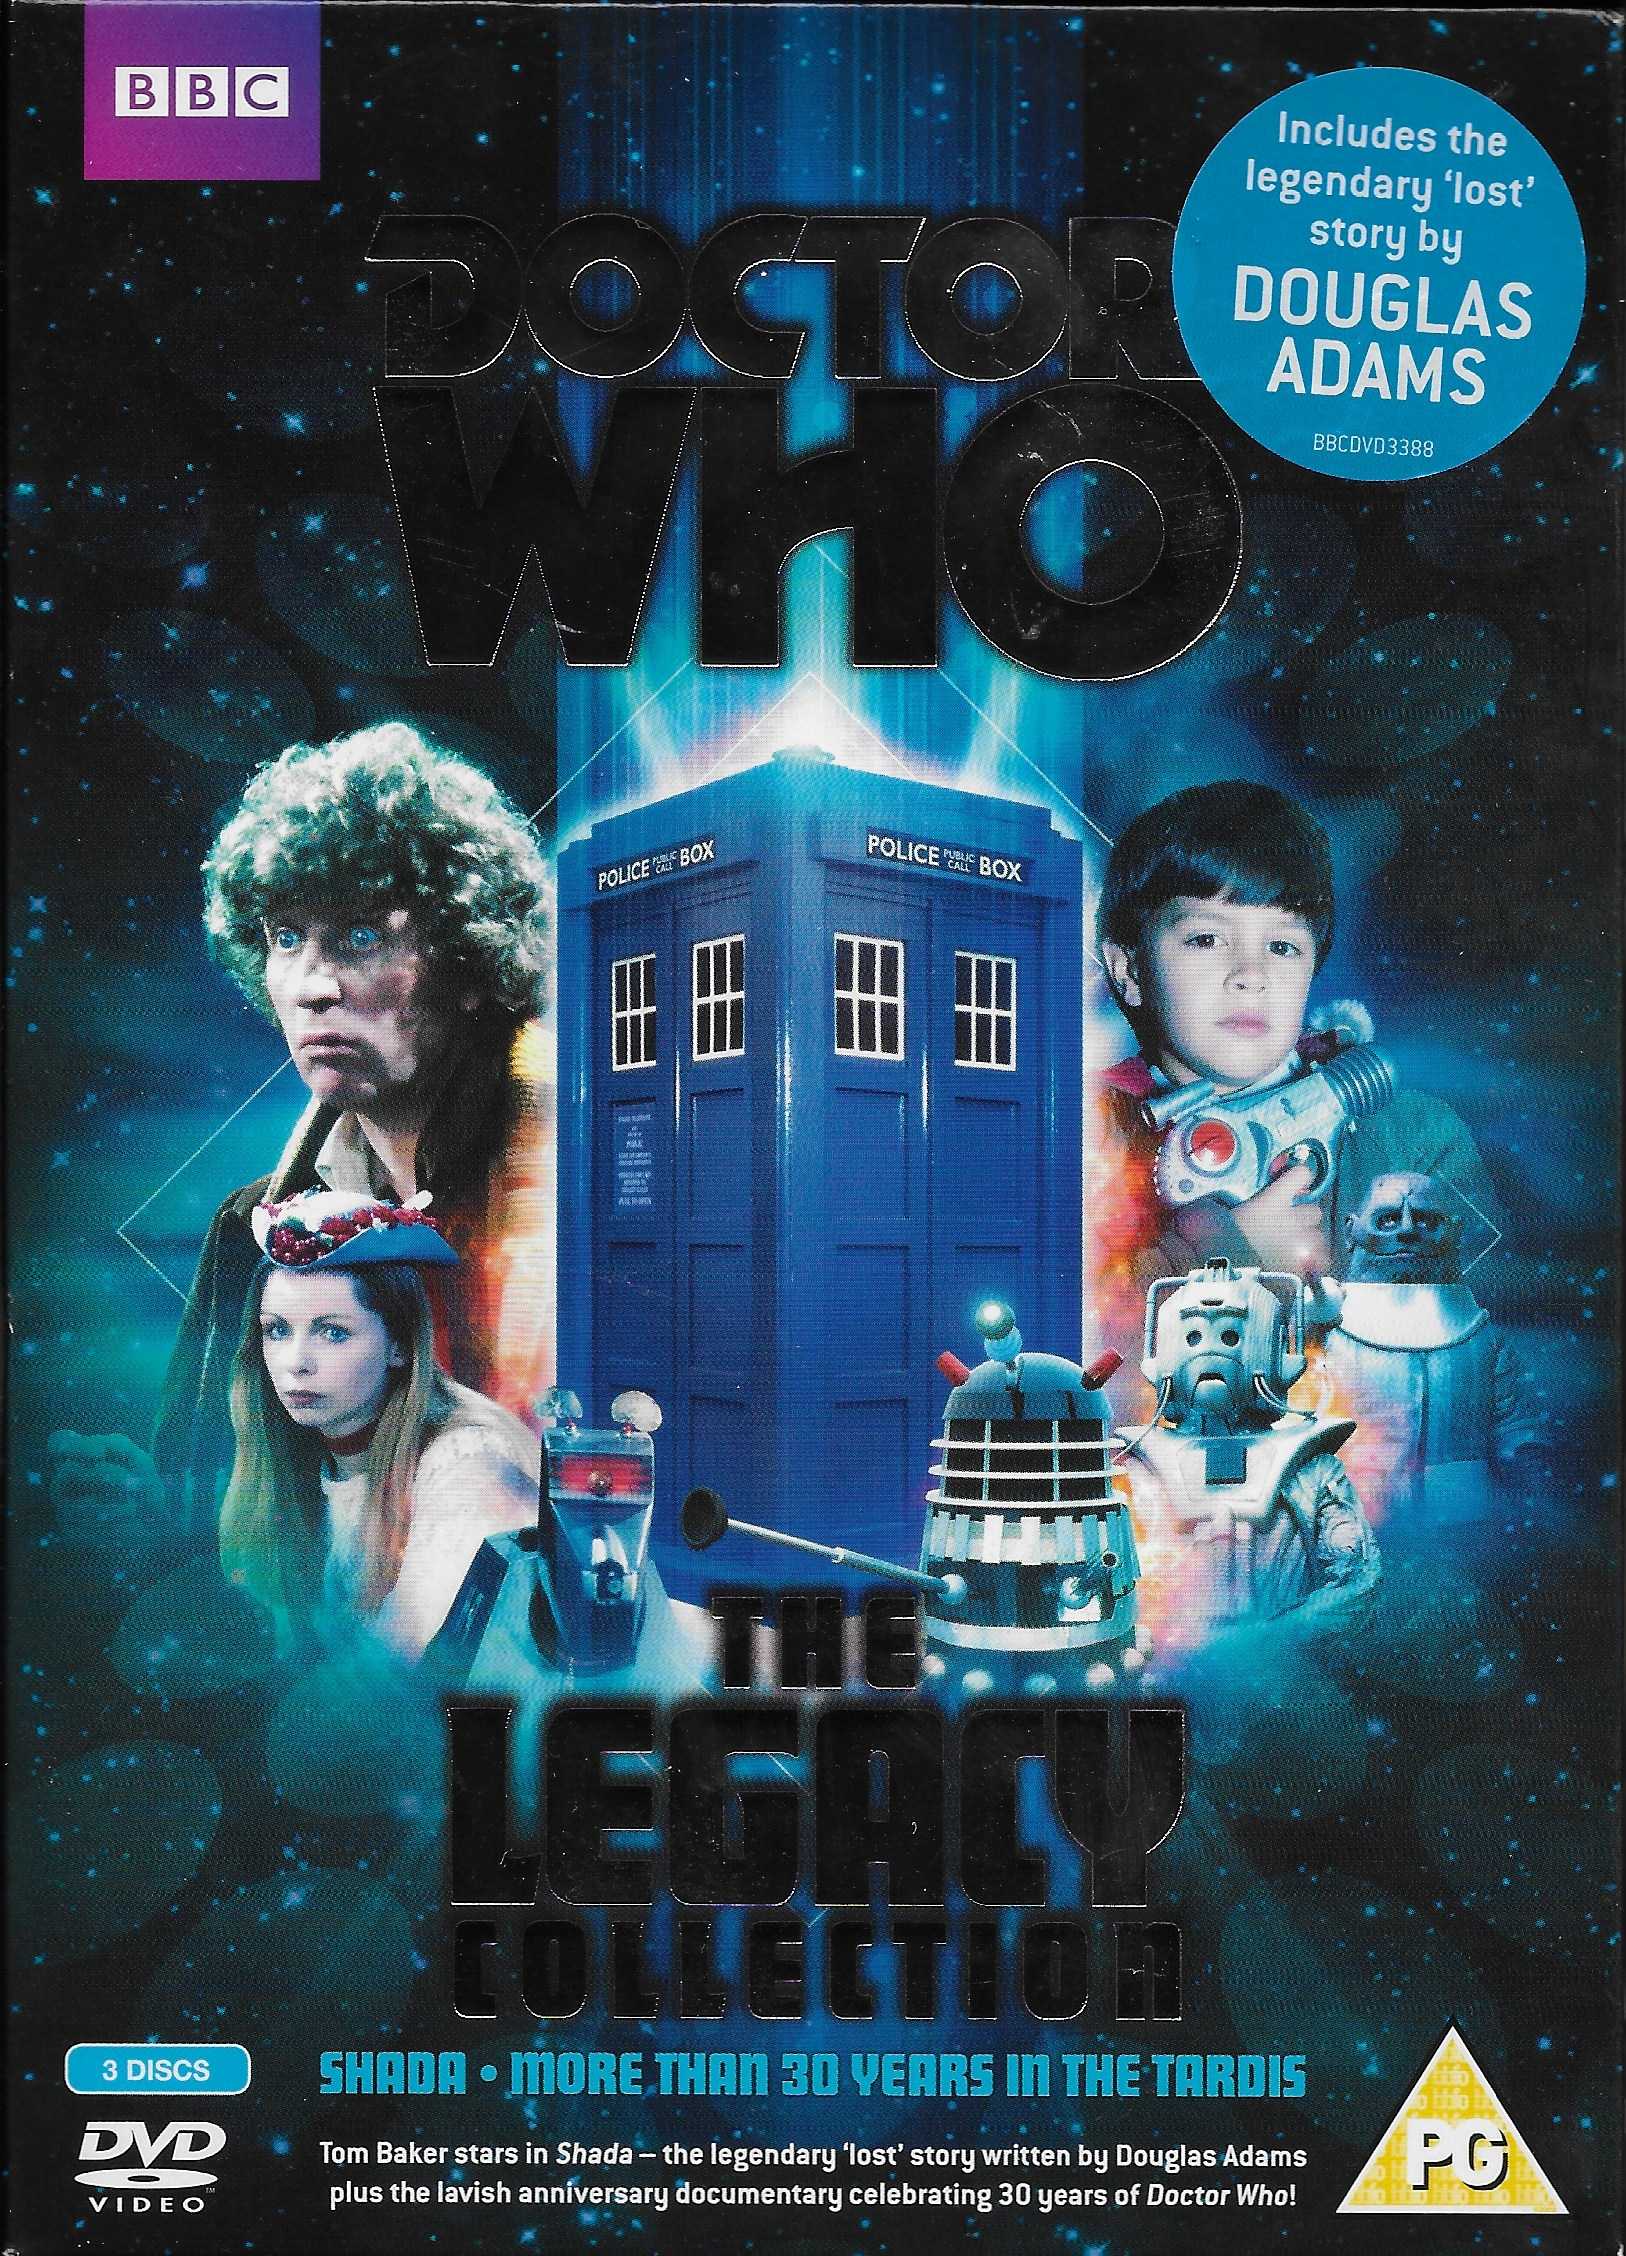 Picture of BBCDVD 3388 Doctor Who - The legacy collection by artist Douglas Adams / Various from the BBC records and Tapes library